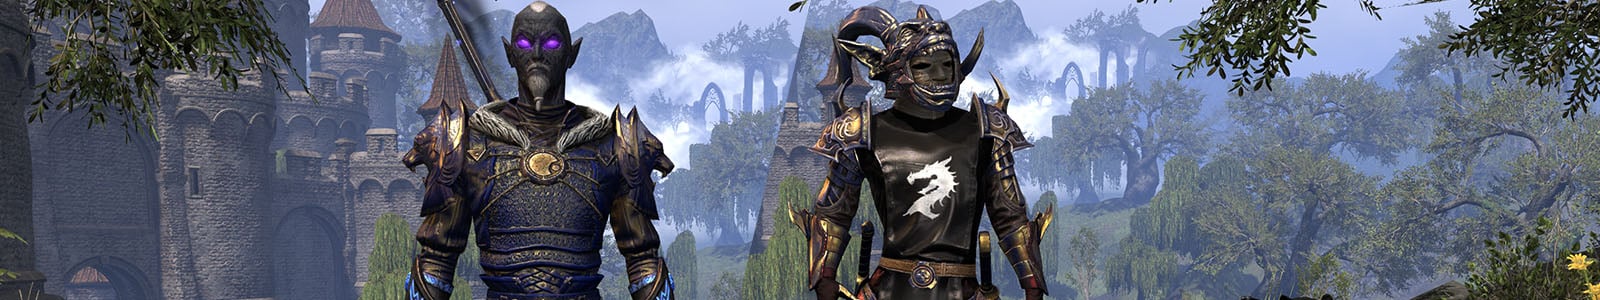 Motifs and Outfit Styles for ESO (Elder Scrolls Online) header